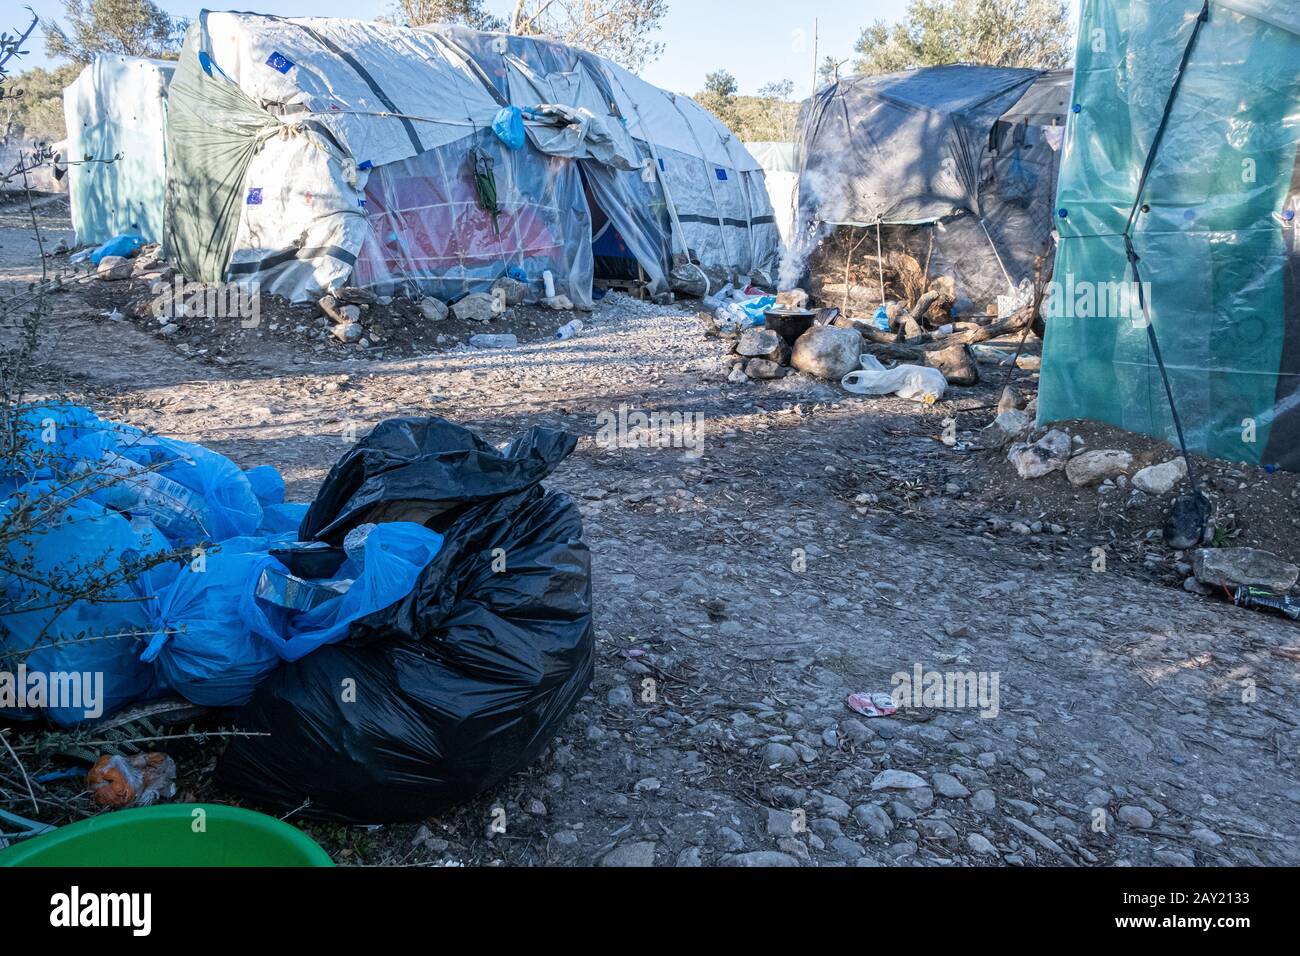 Cooking between the rubbish trash at Moria refugee camp Lesbos Stock Photo